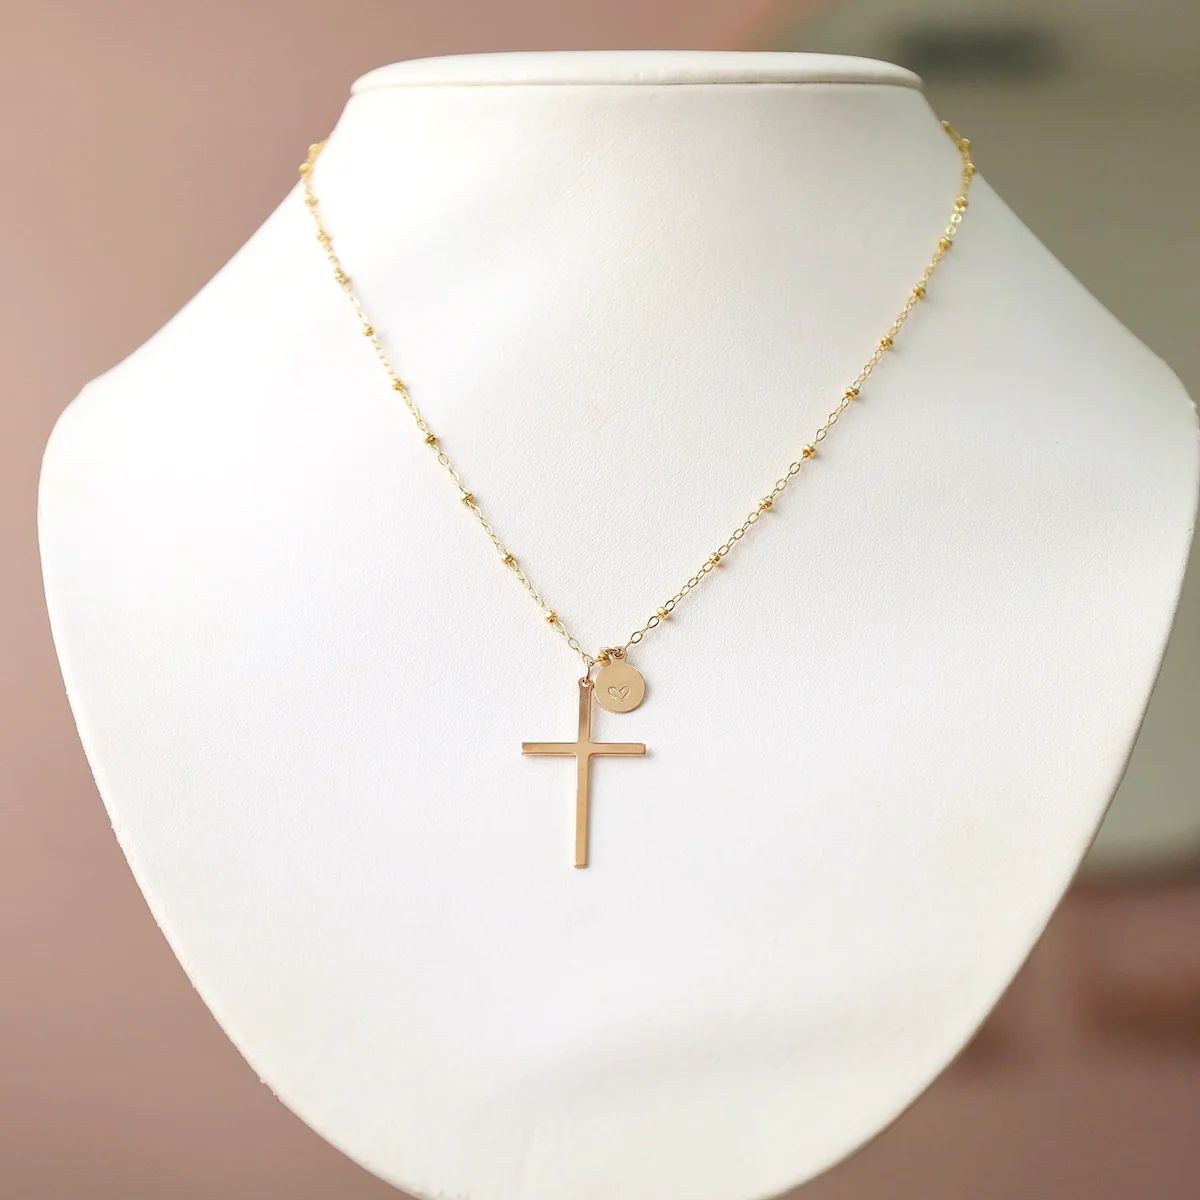 Eternal Love Necklace by Jess Fay | Taudrey